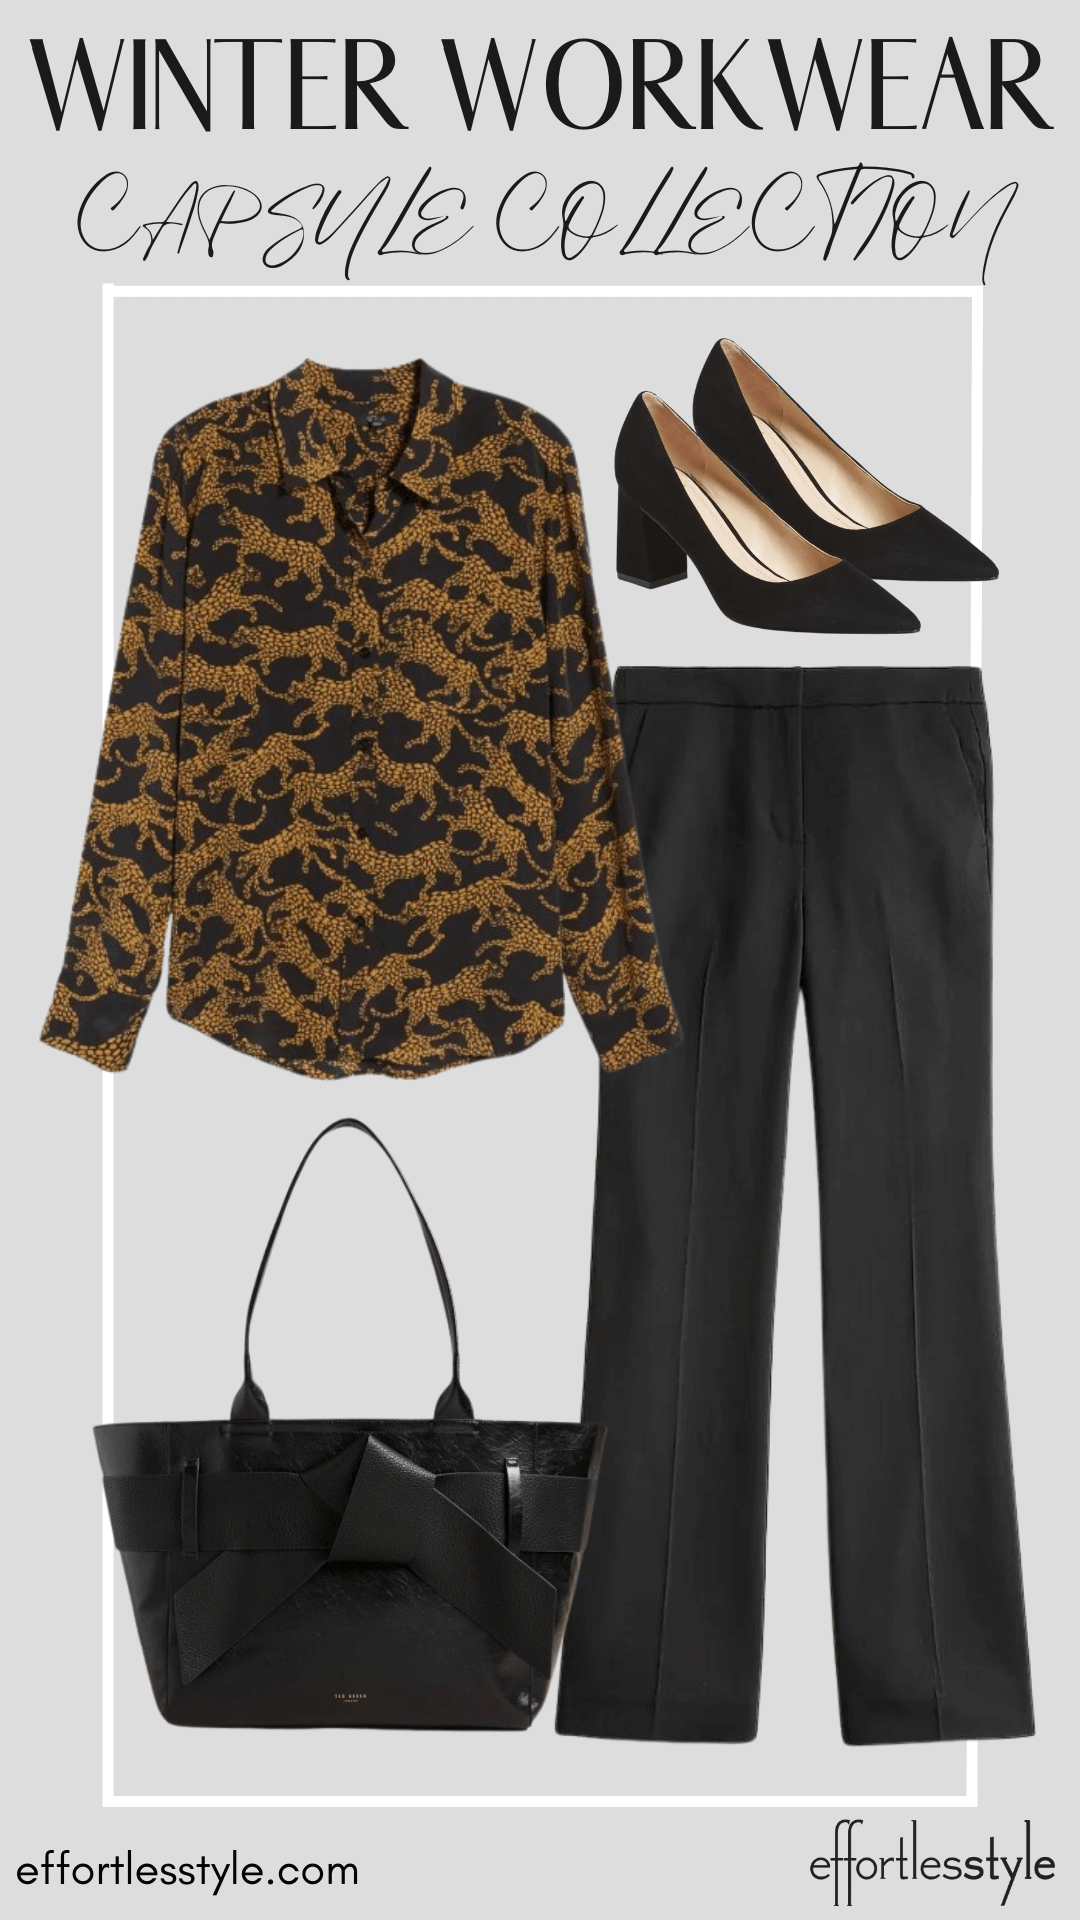 Lynx Printed Blouse & Black Pants how to wear a blouse with suit pants how to wear an animal print blouse personal stylists show how to style suit pants